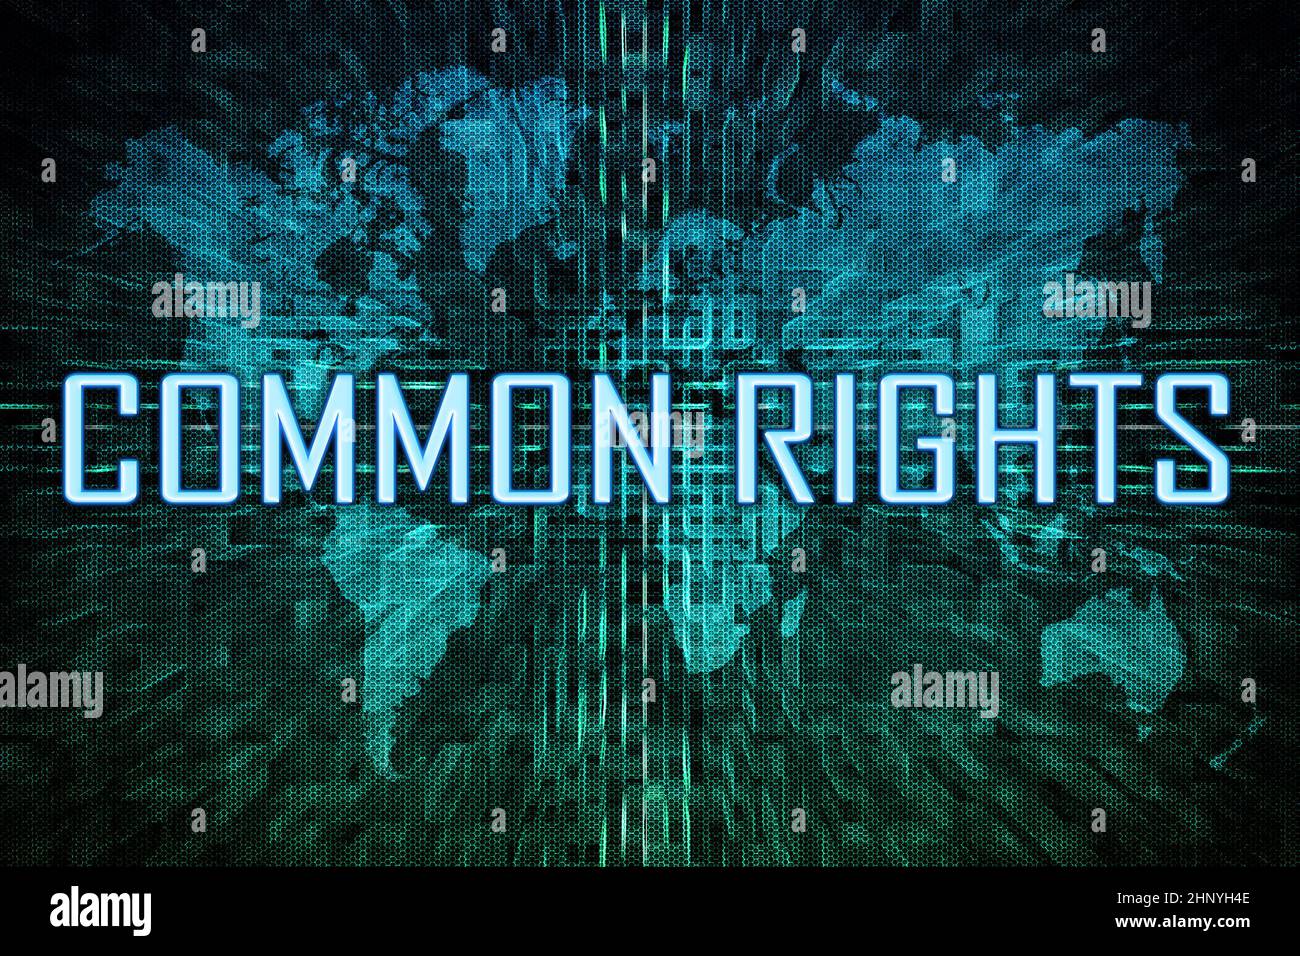 Common Rights - text concept on green digital world map background. Stock Photo